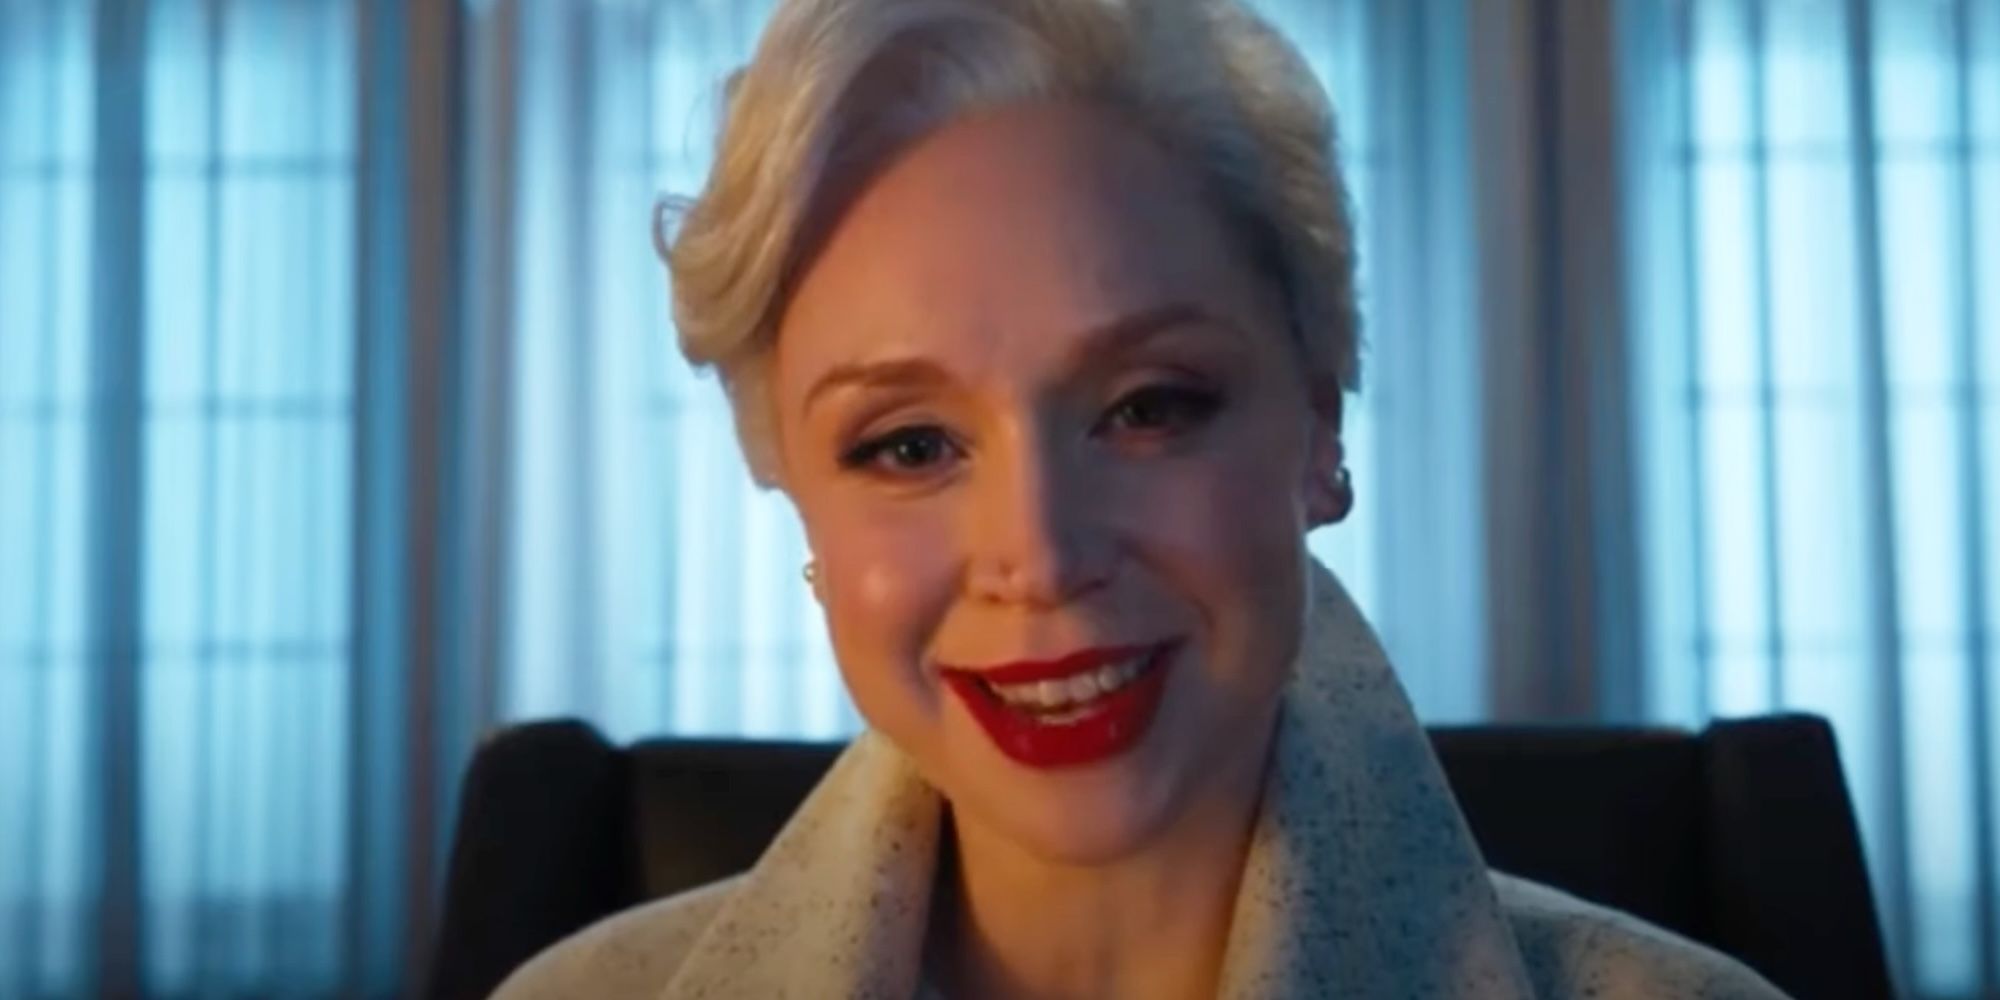 Gwendoline Christie as Weems smiling in Wednesday